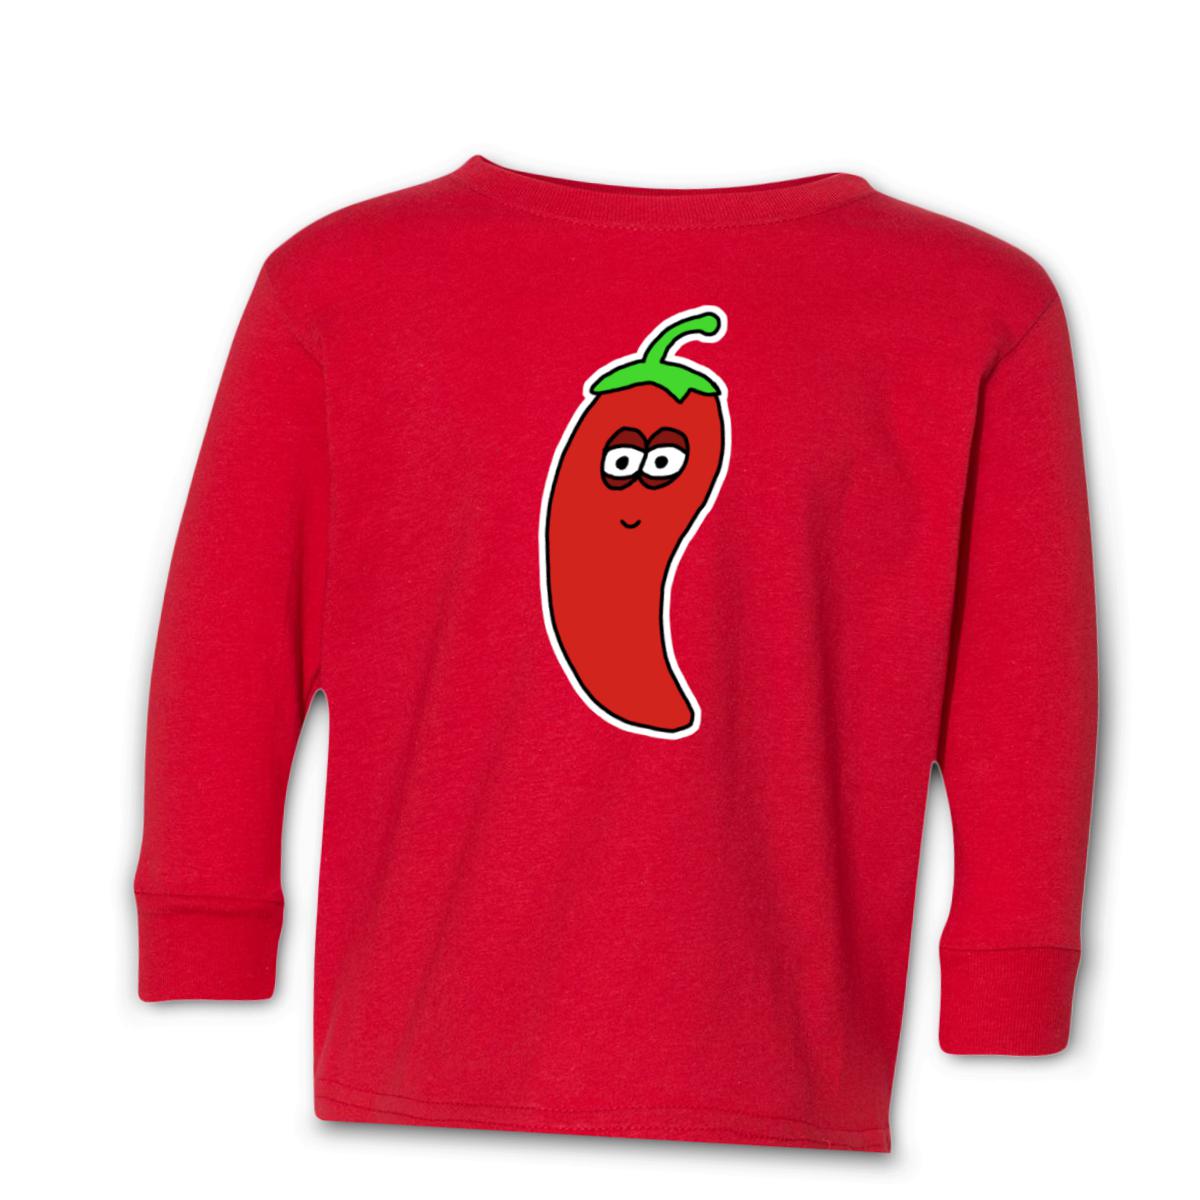 Chili Pepper Toddler Long Sleeve Tee 56T red